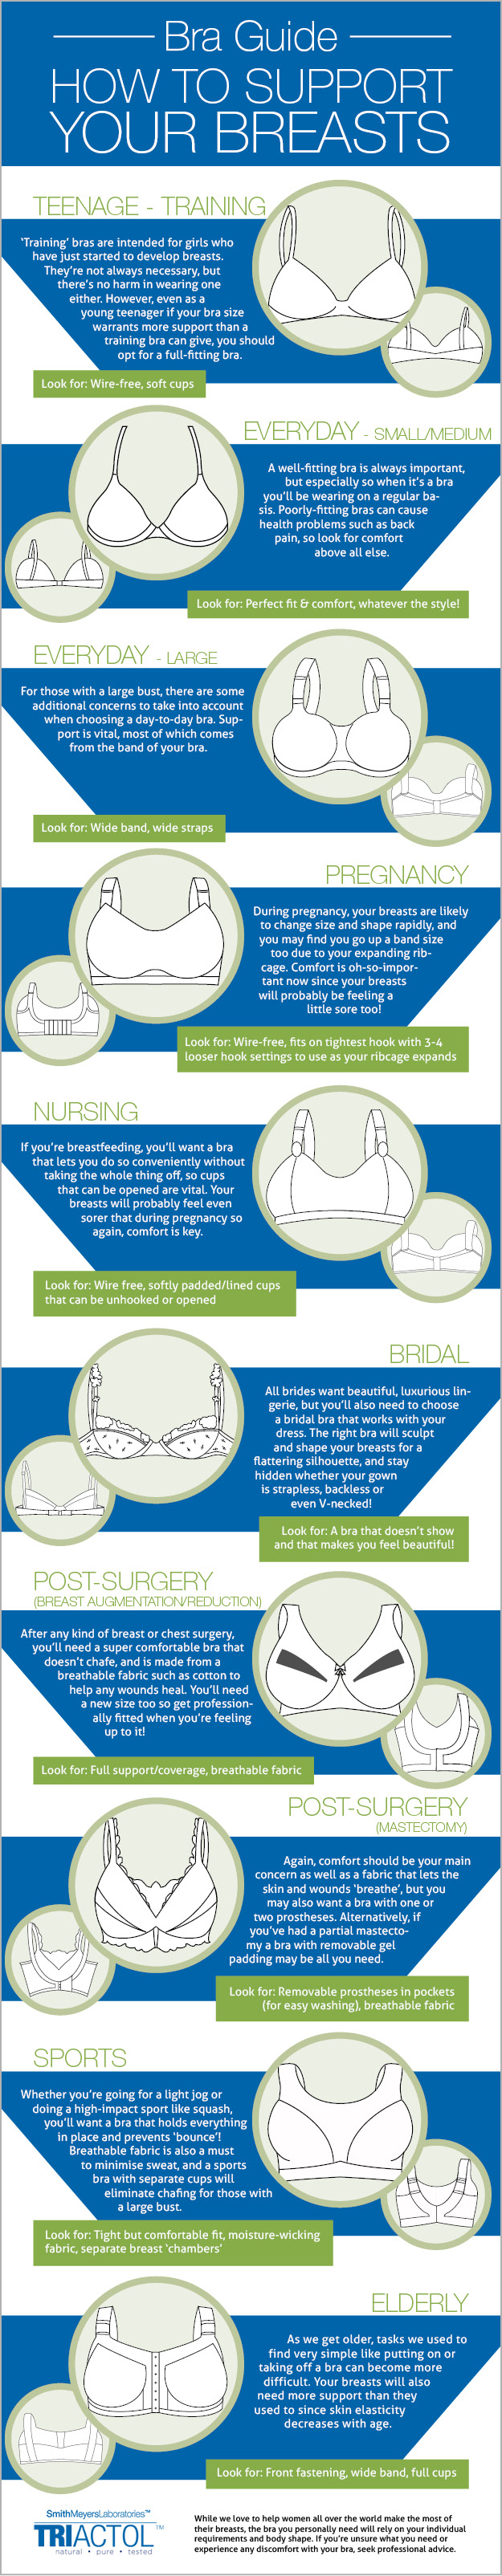 Ultimate Bra Guide-Infographic